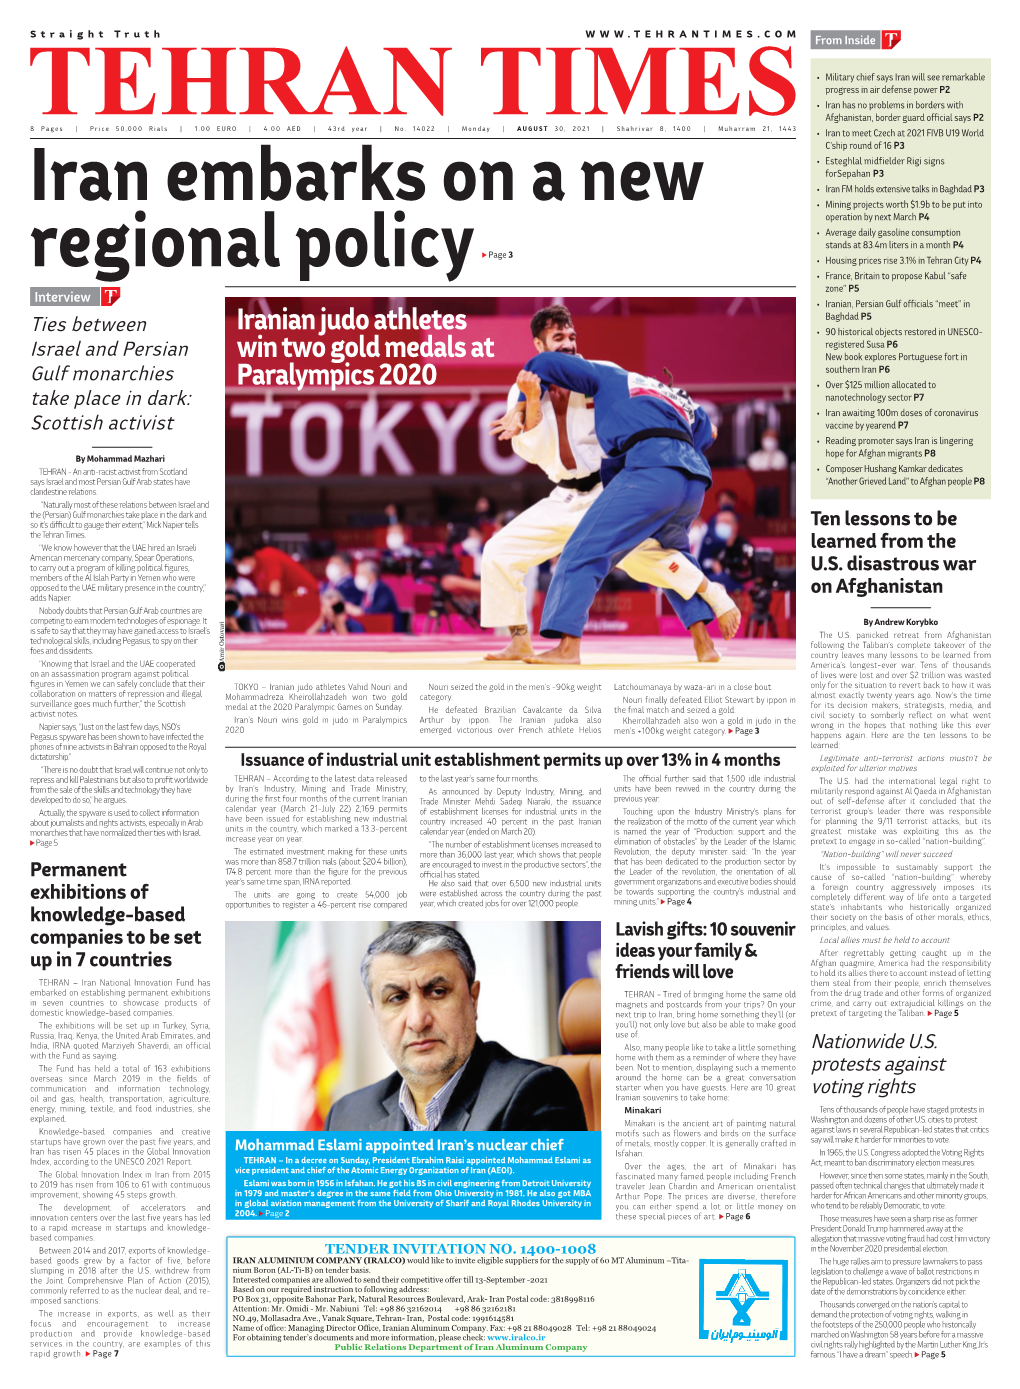 Iran Embarks on a New Regional Policy